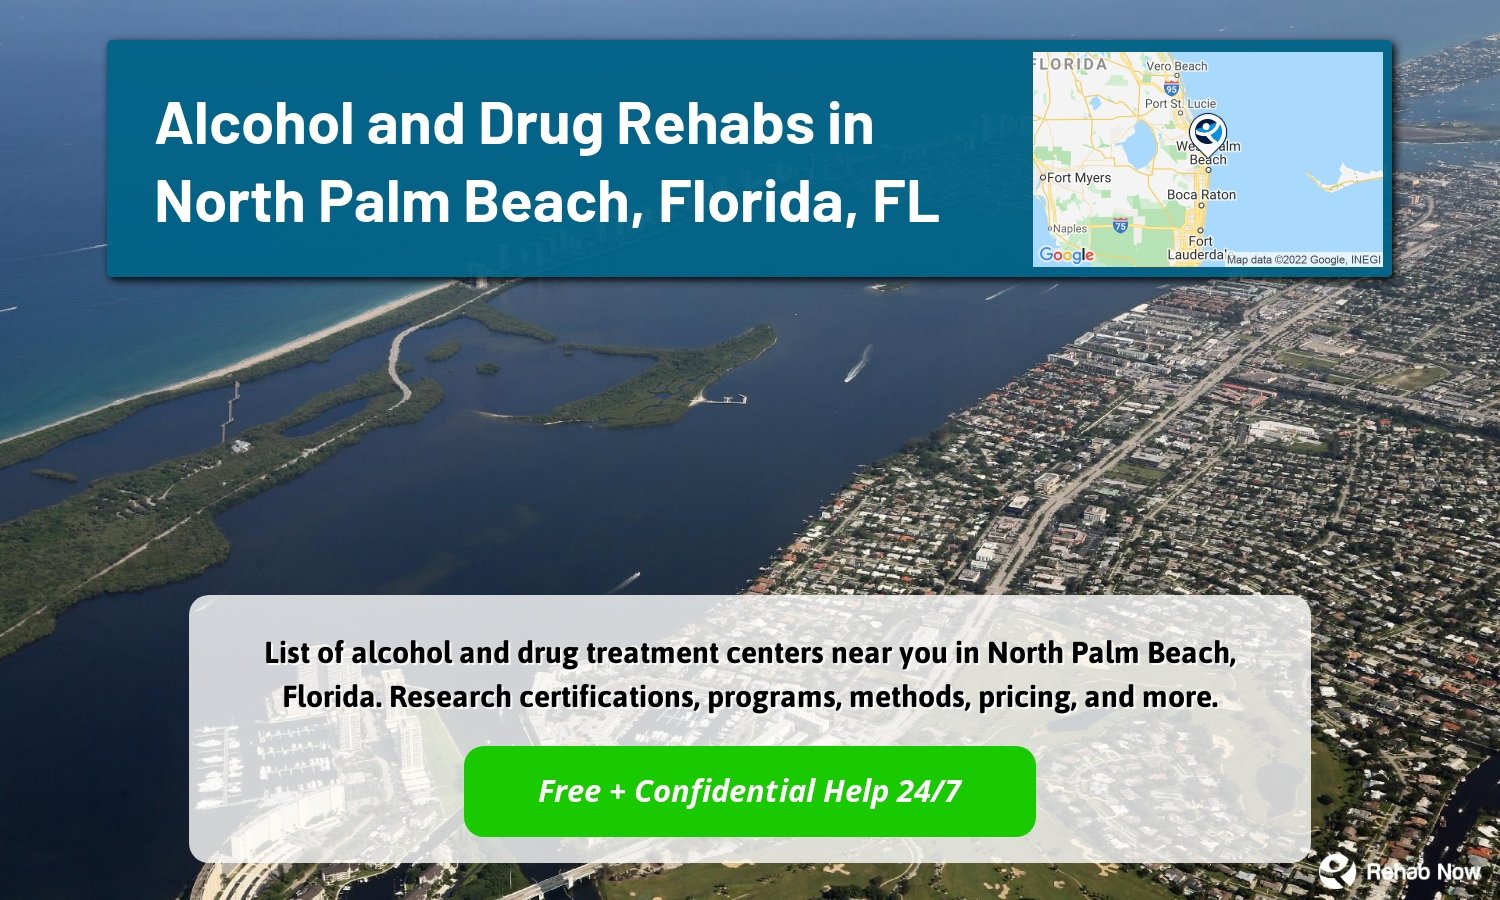 List of alcohol and drug treatment centers near you in North Palm Beach, Florida. Research certifications, programs, methods, pricing, and more.